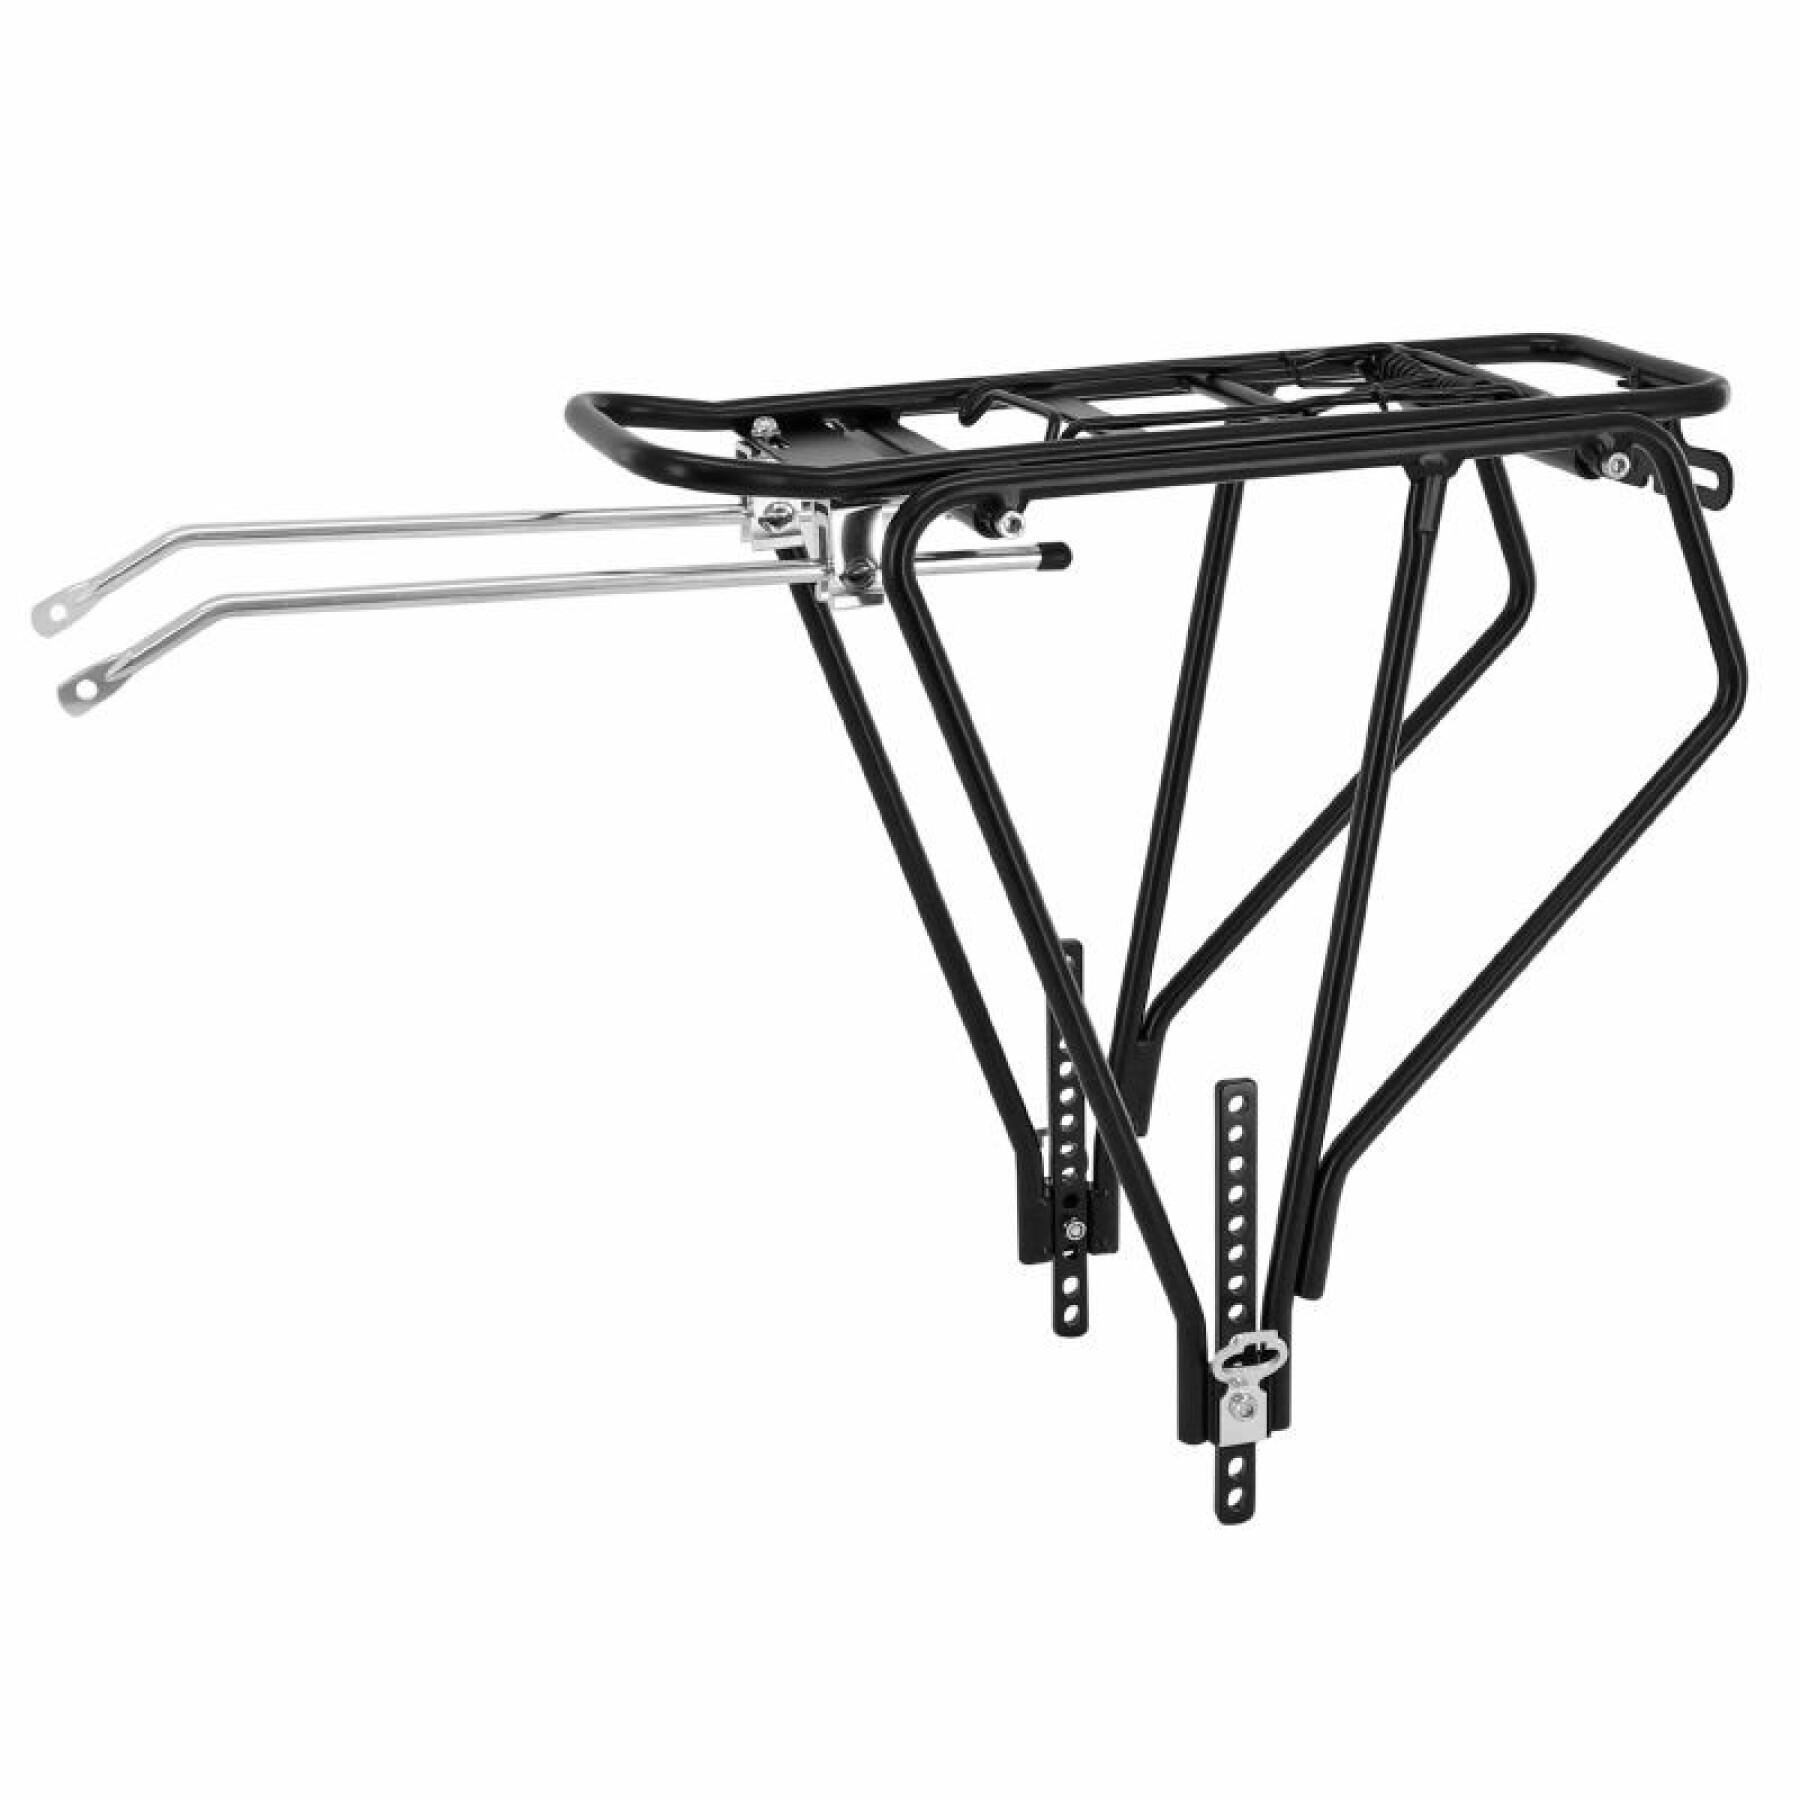 Rear bike carrier with aluminium rods adjustable width from 135 to 205 mm P2R Fat Bike